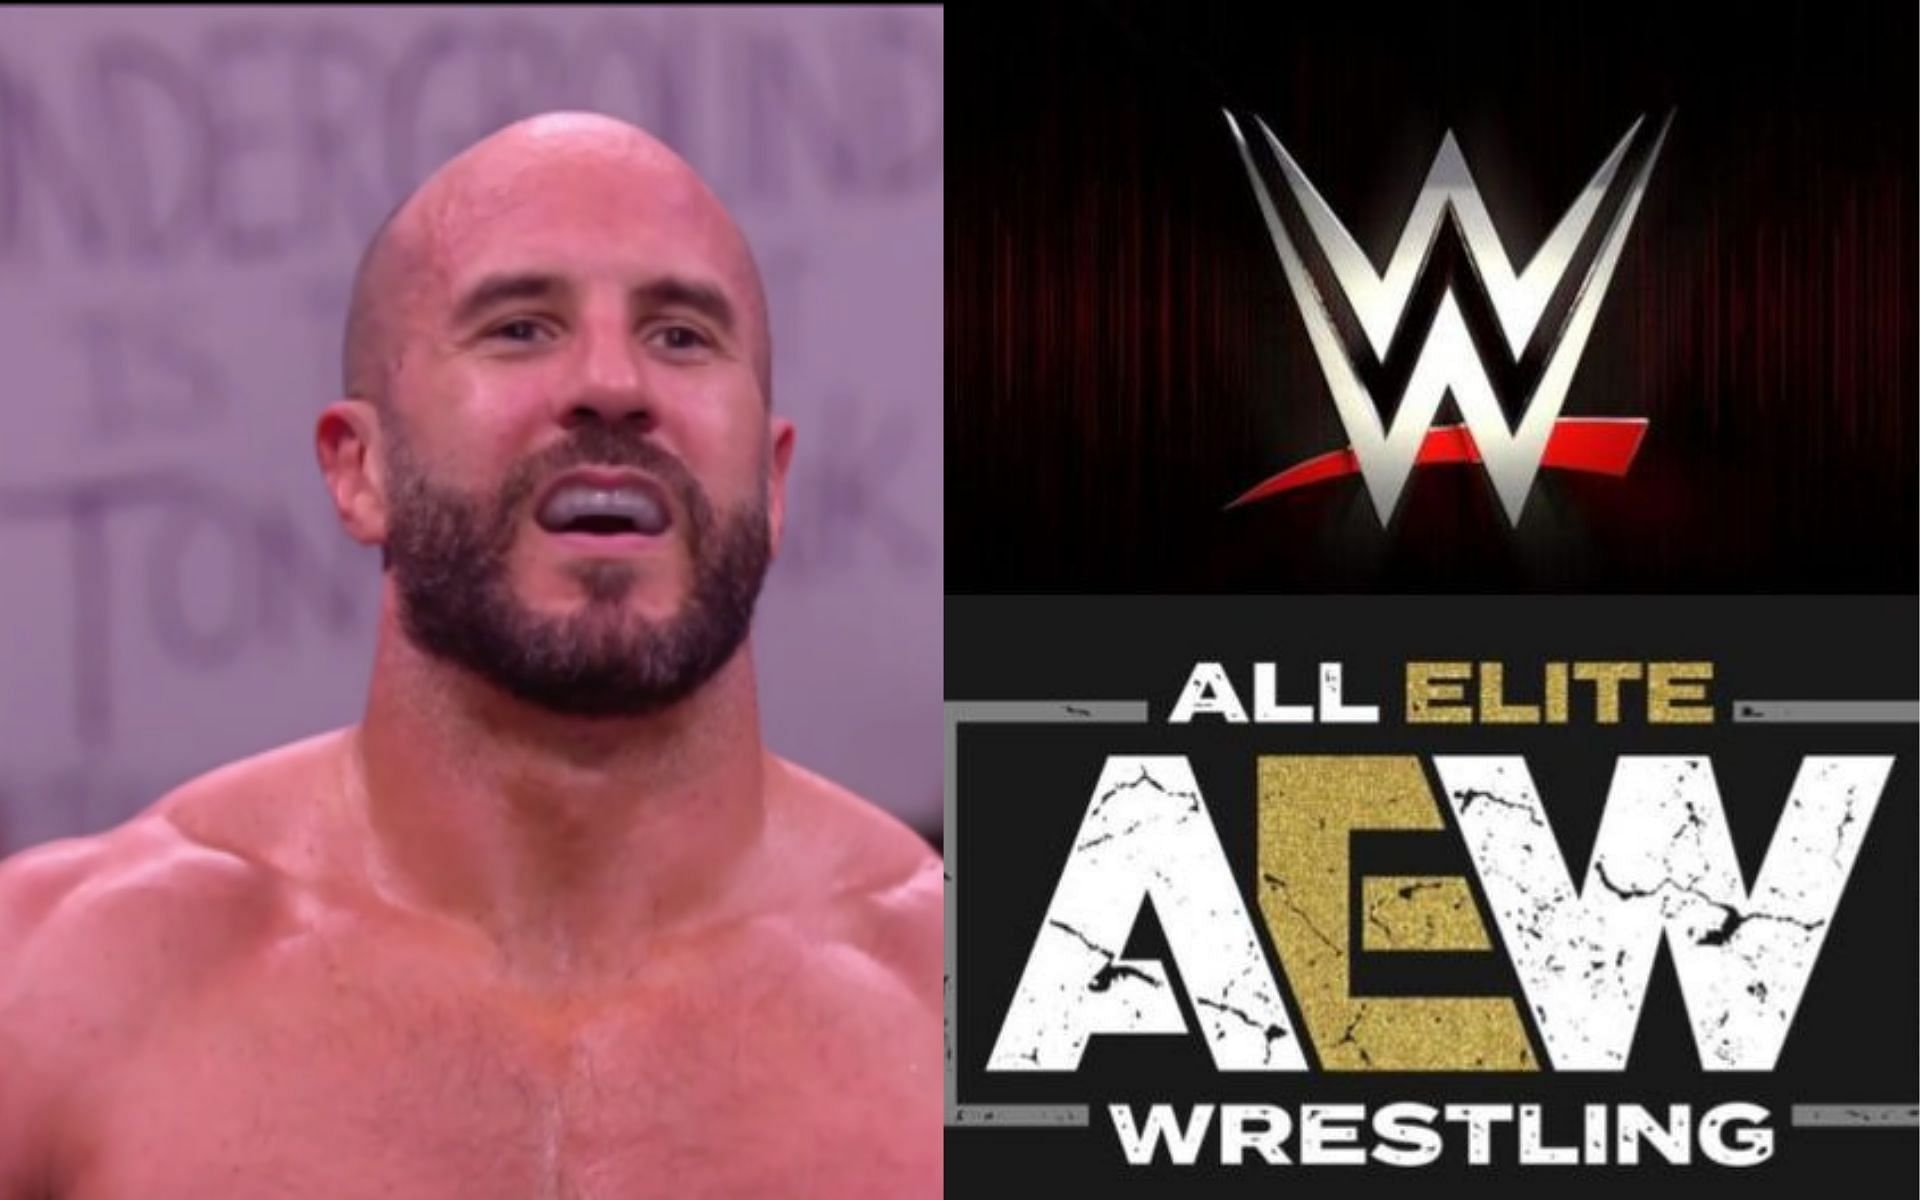 Current AEW star Claudio Castagnoli previously competed in WWE.